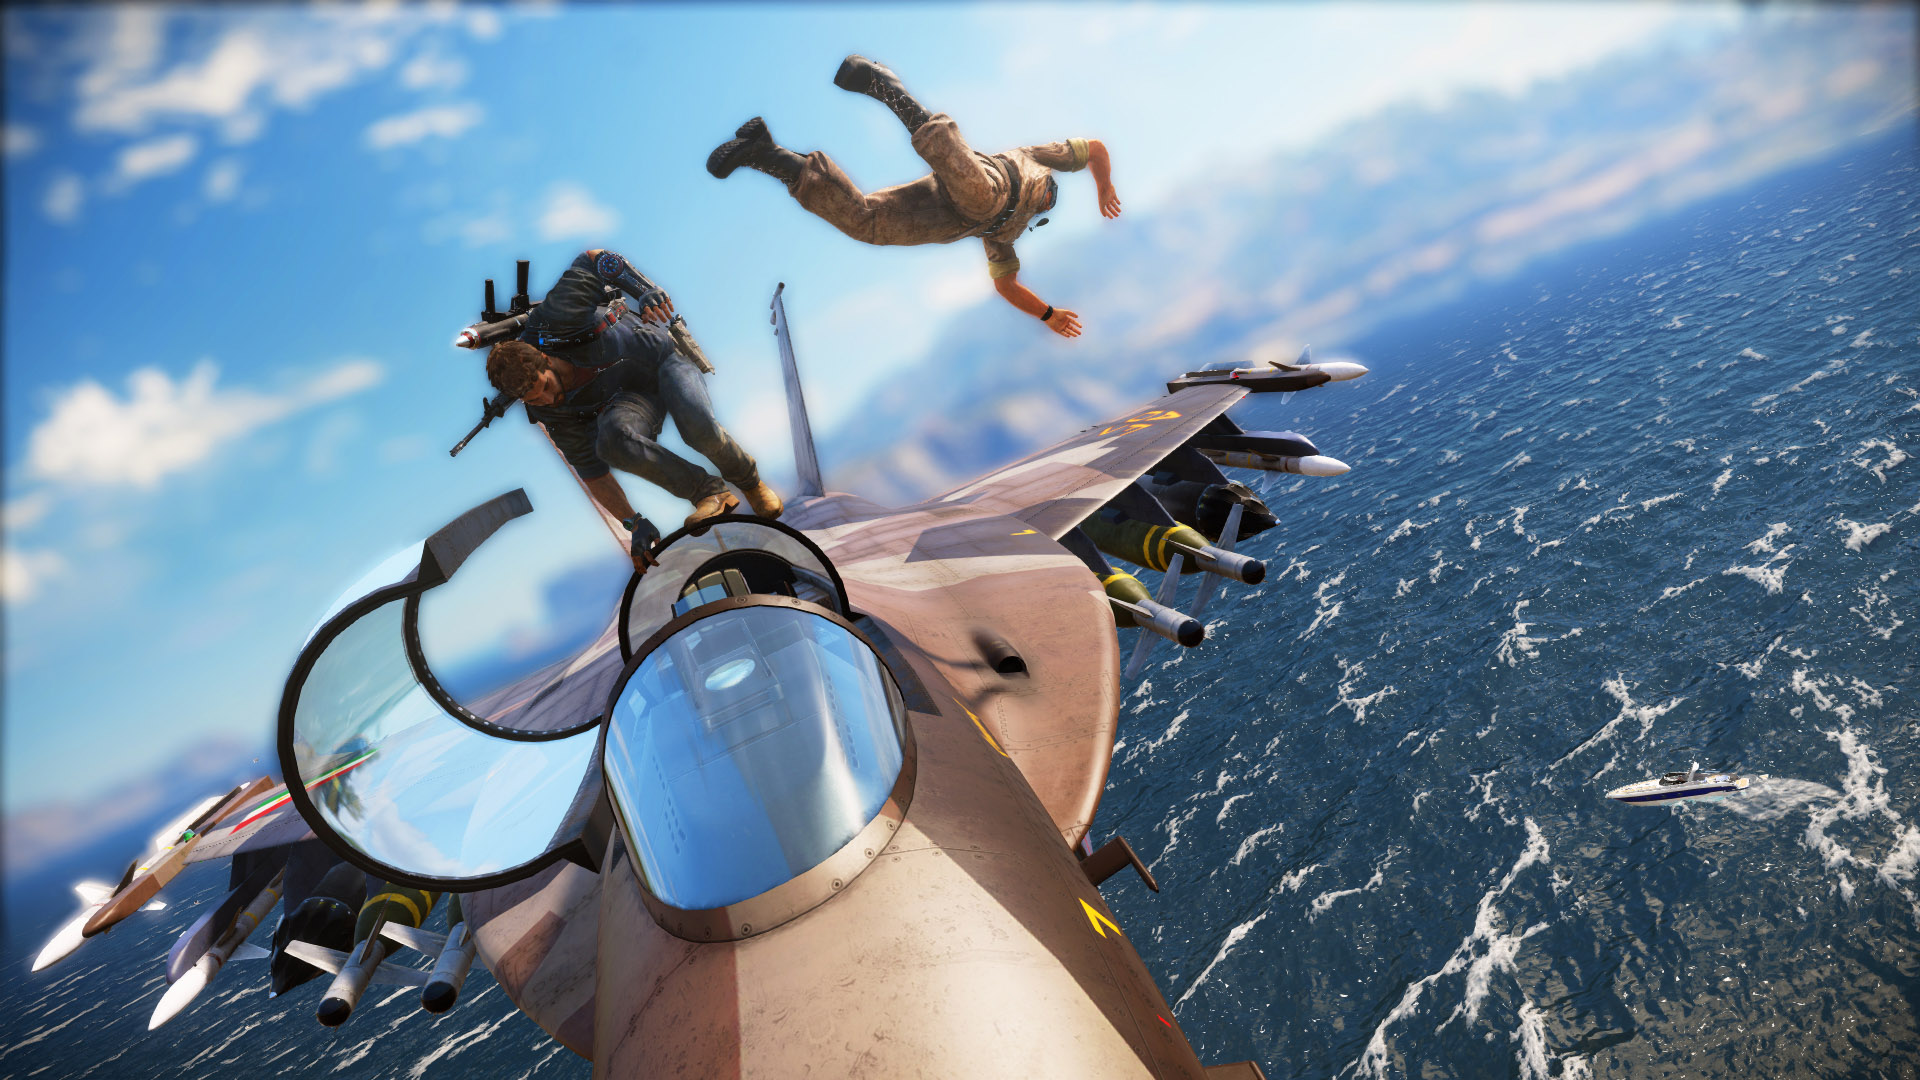 Graphics optimization in Just Cause 3 for AMD users